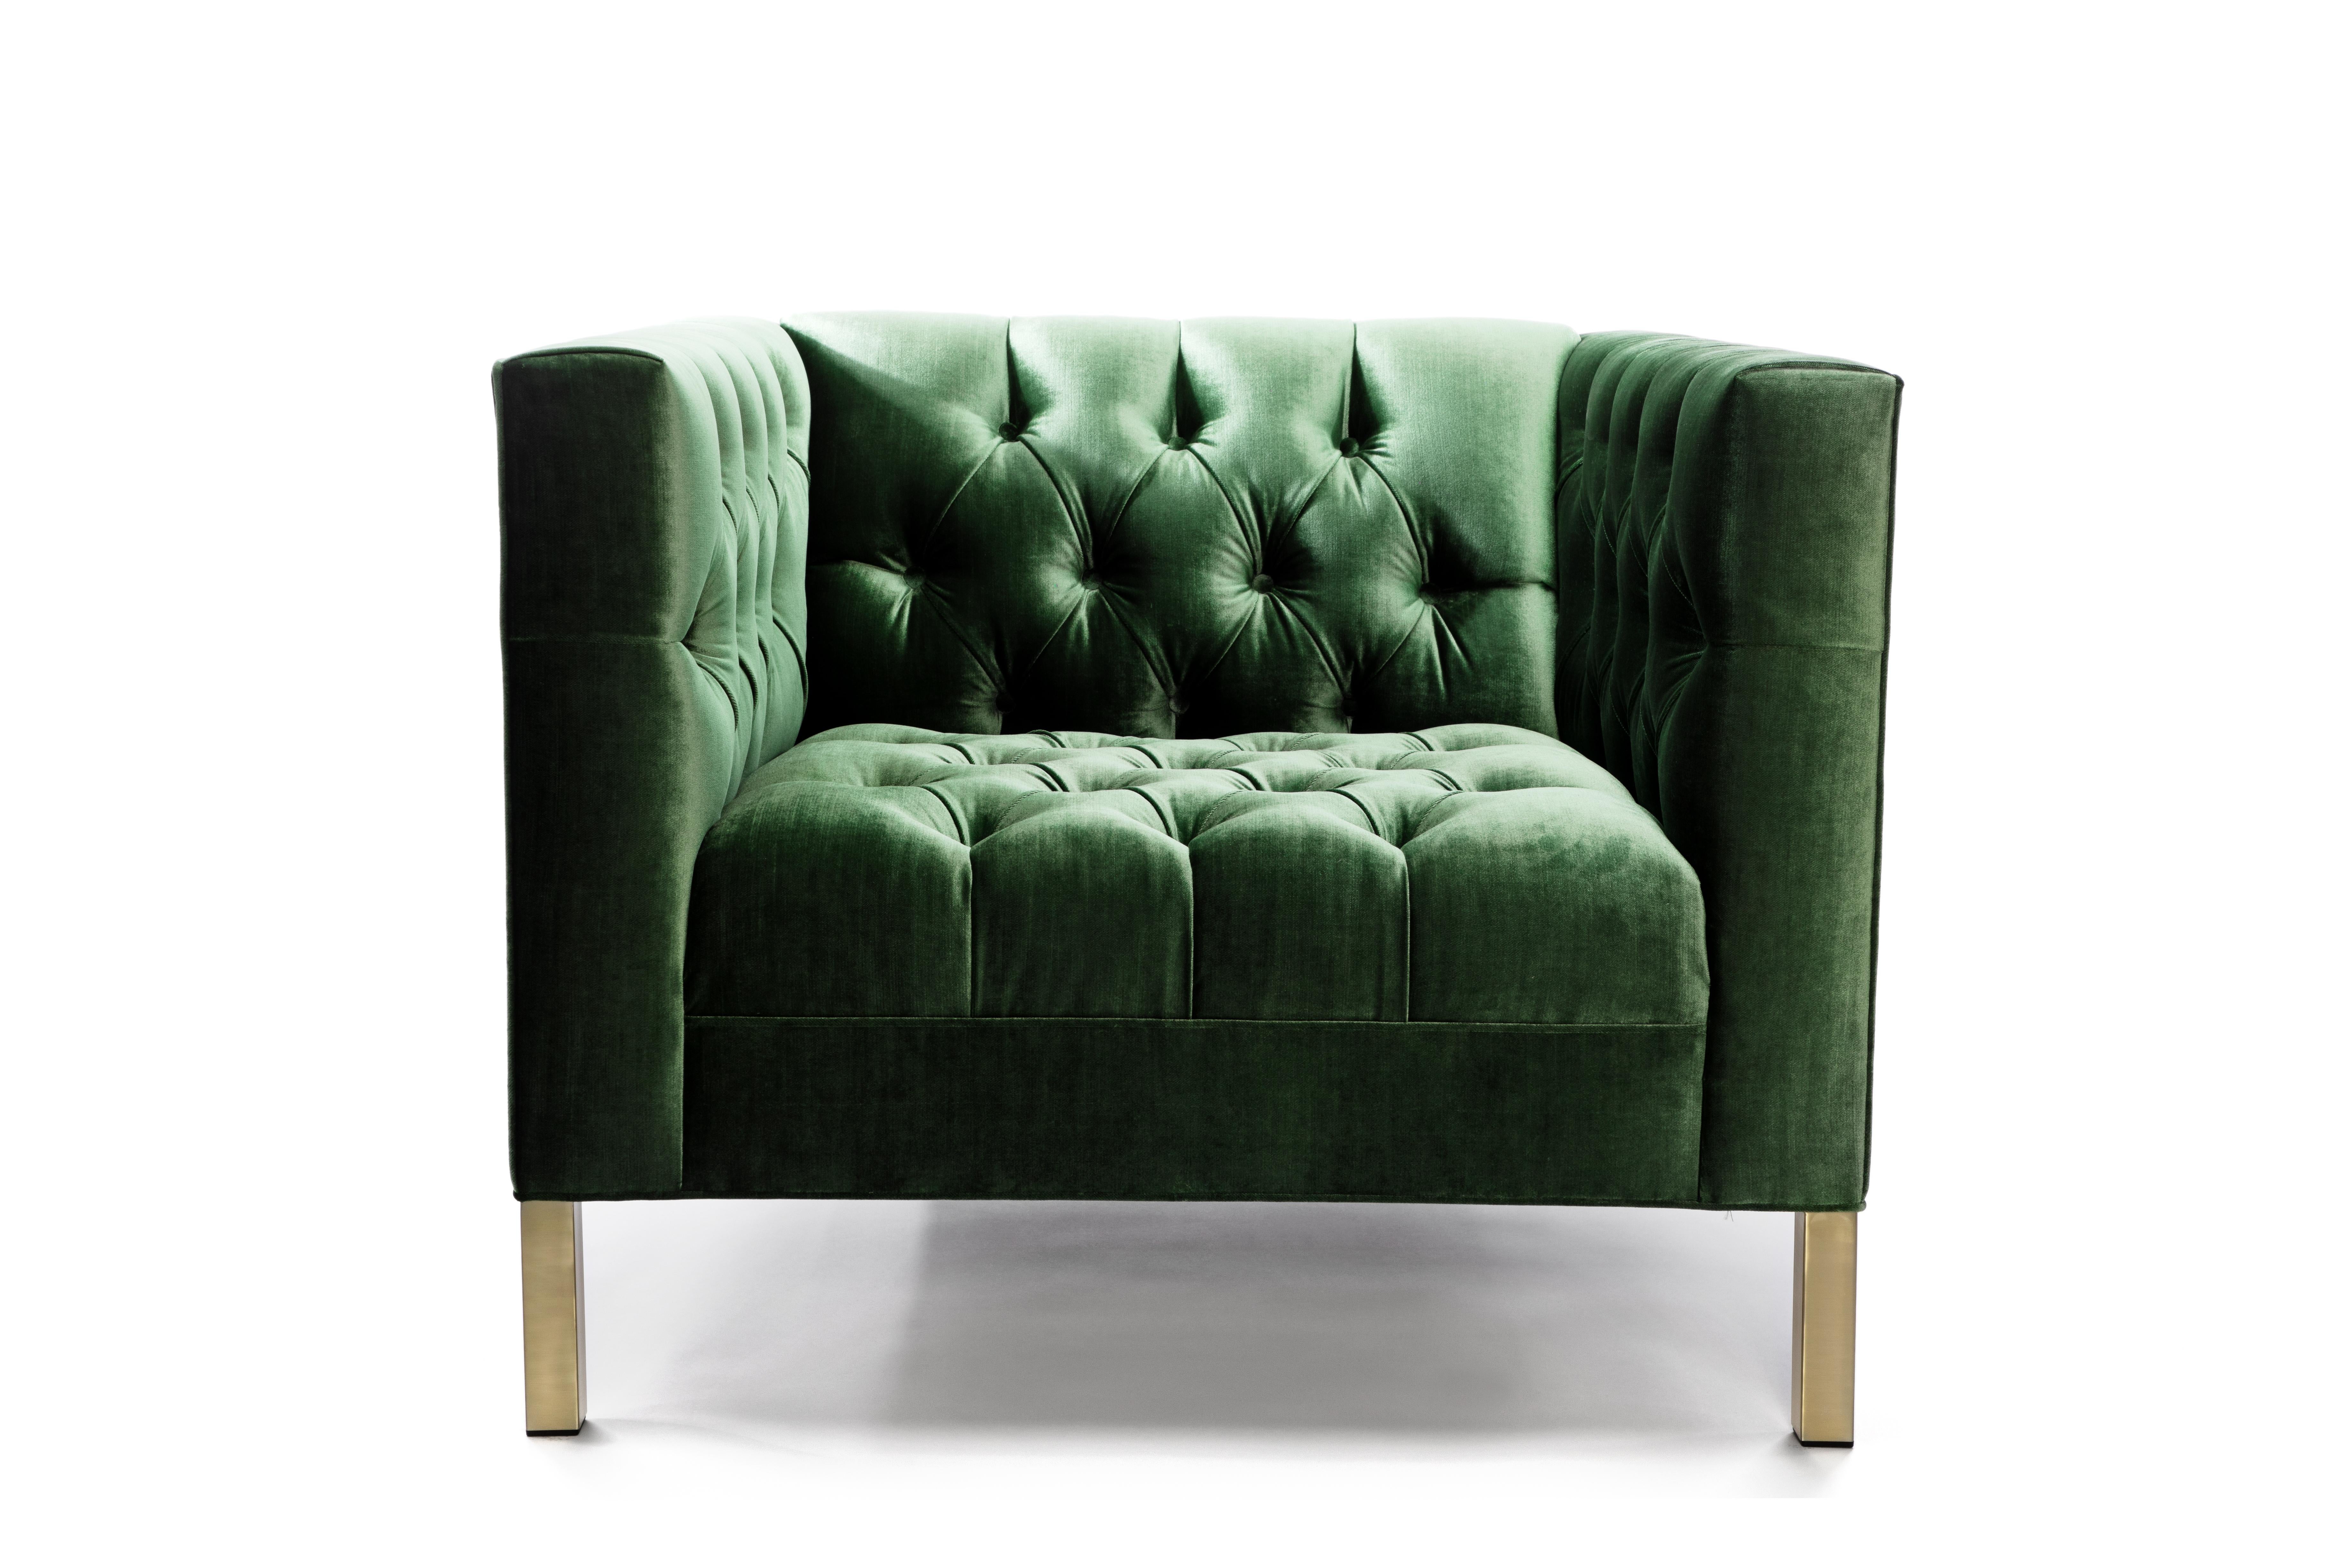 Just like her name, Capri is cool, calm and collected. Covered in one of our luxe fabrics or leathers, her impeccable tufted detail creates a sleek, refined space in an office or home. 

Shown in juniper and peacock velvets with brass finish metal